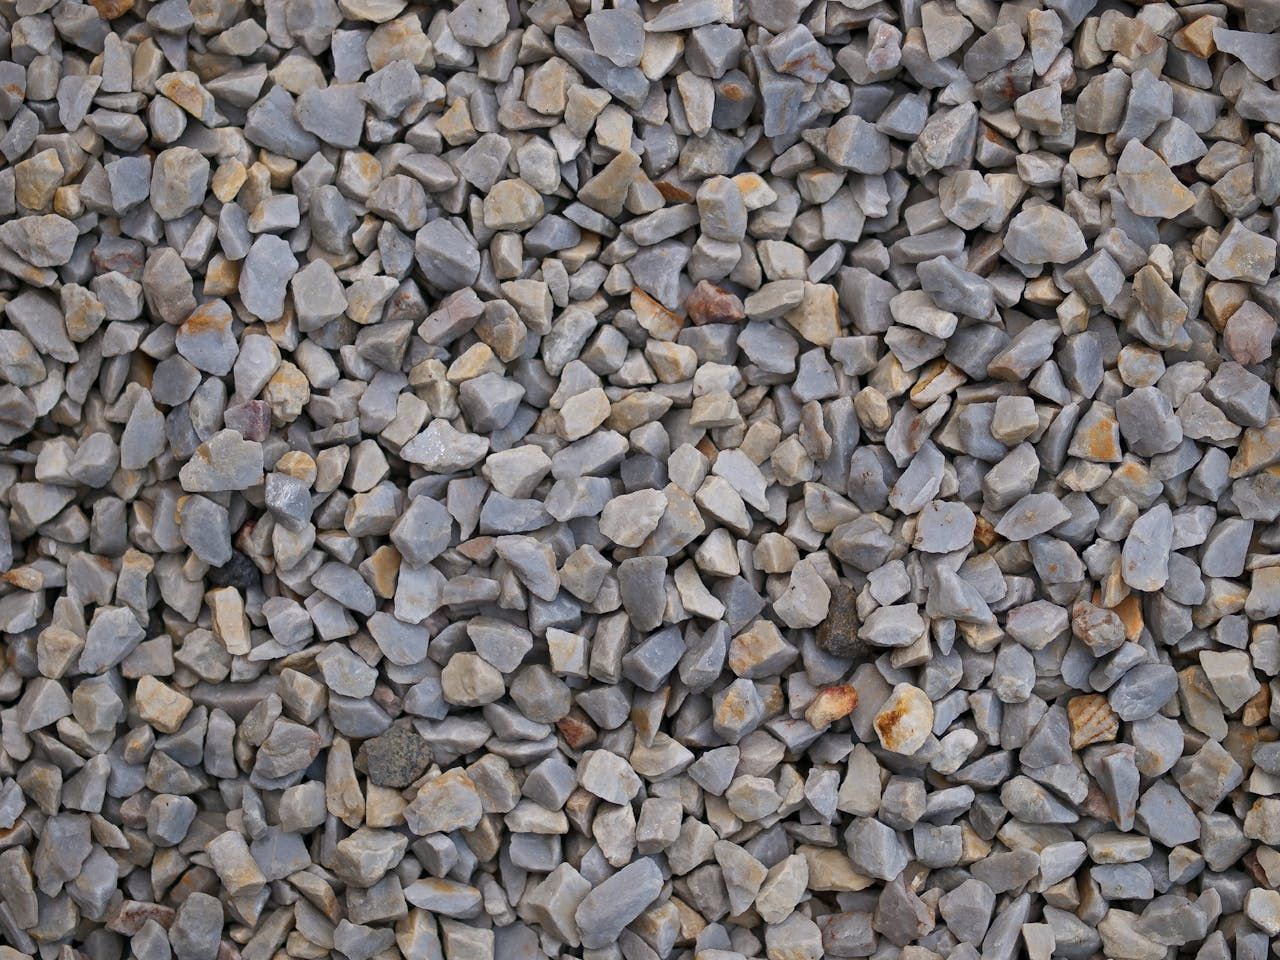 A pile of aggregate stones